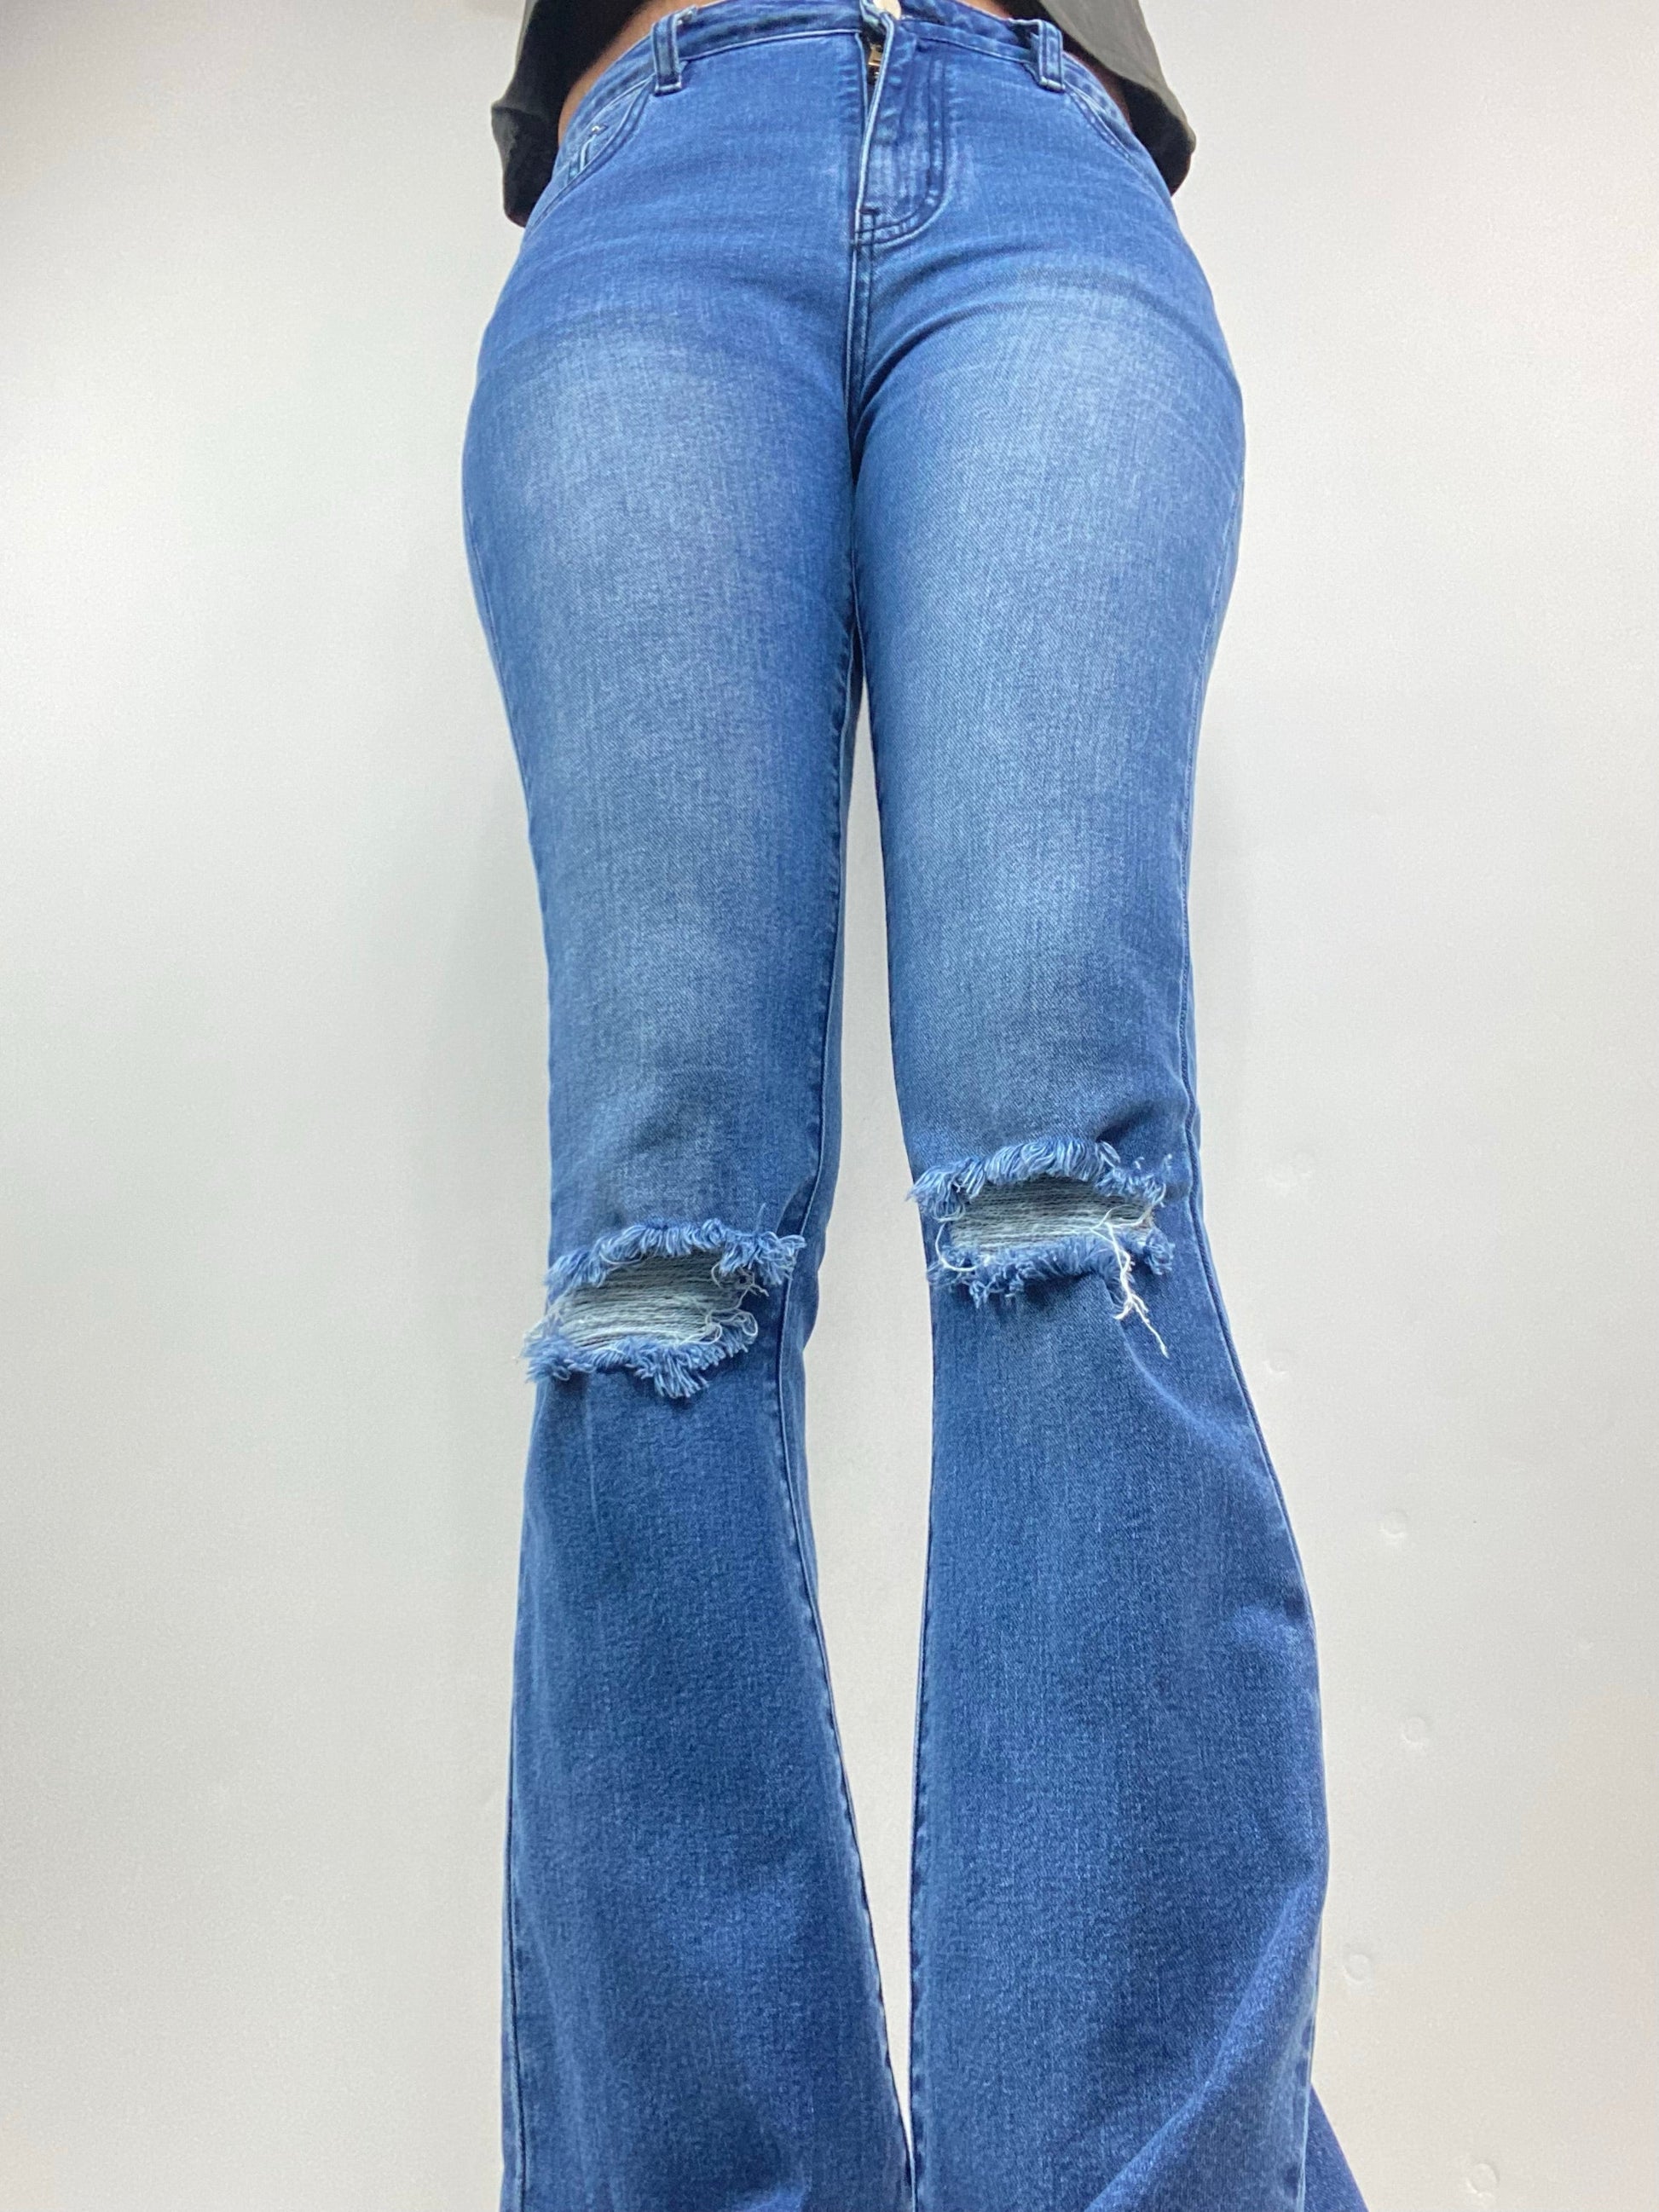 tall girl flared jeans in light blue wash with distressed knee